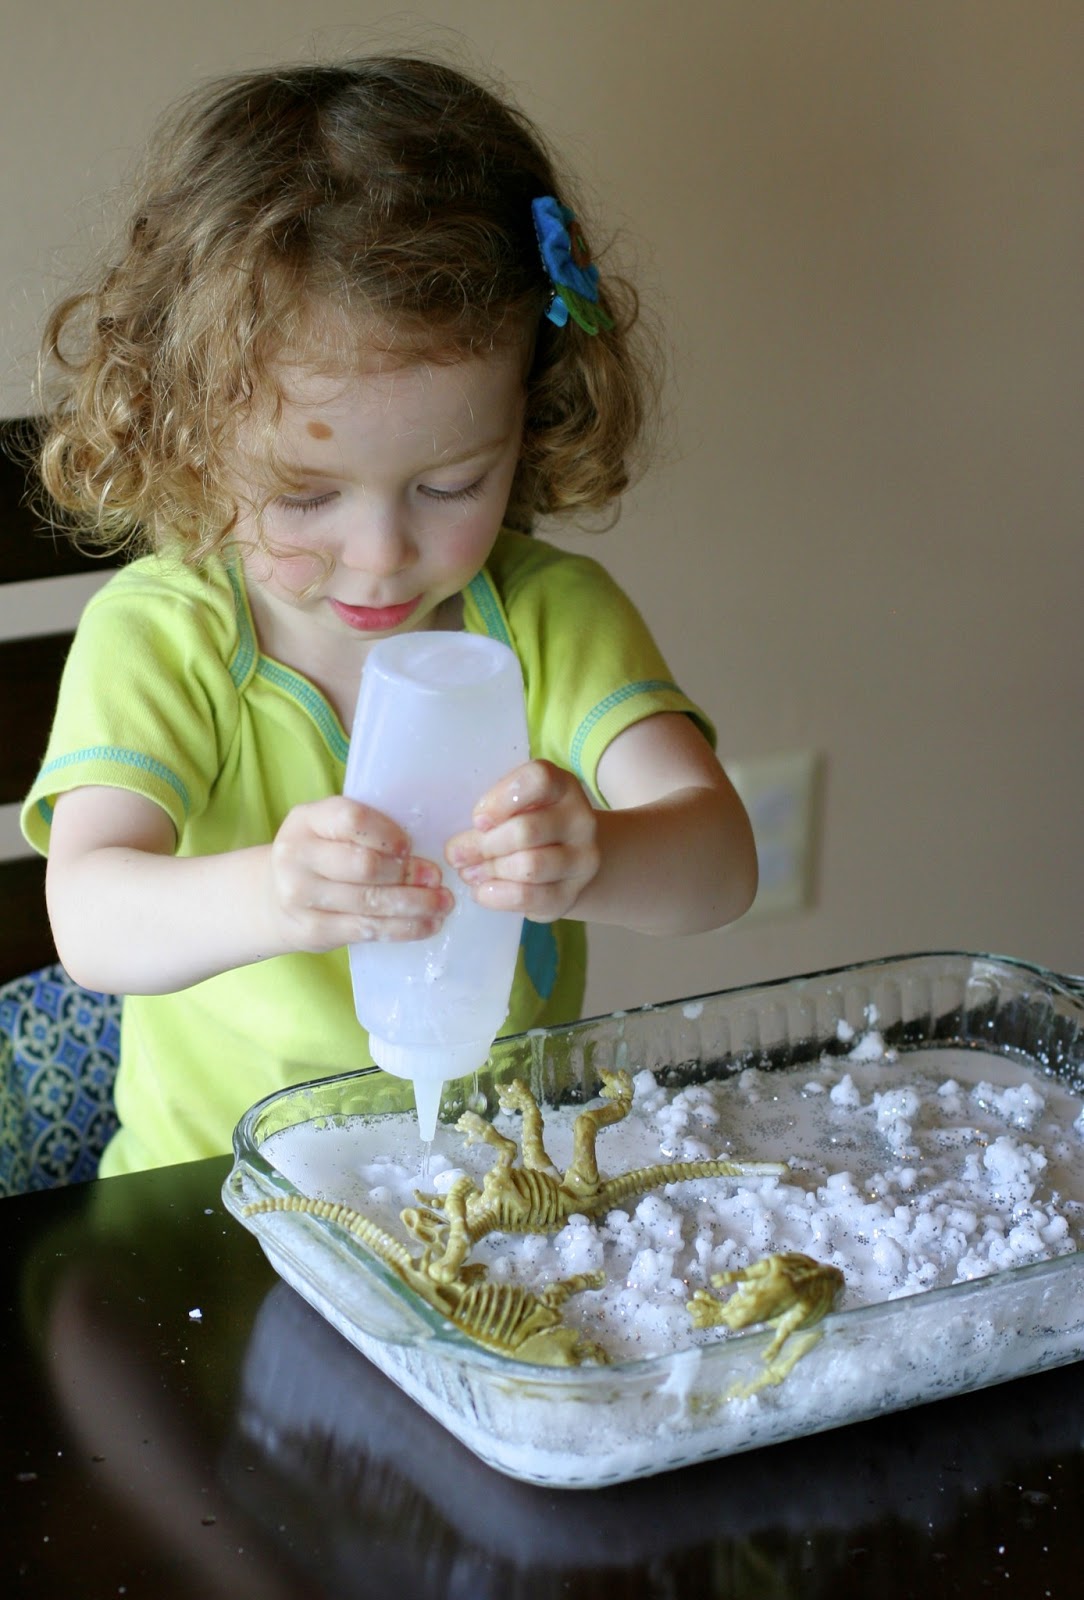 Frozen Sensory Snow - Easy, cheap (cost around one dollar!), and the icy cold lasted for TWO hours while we played!  Perfect for keeping cool this summer from Fun at Home with Kids